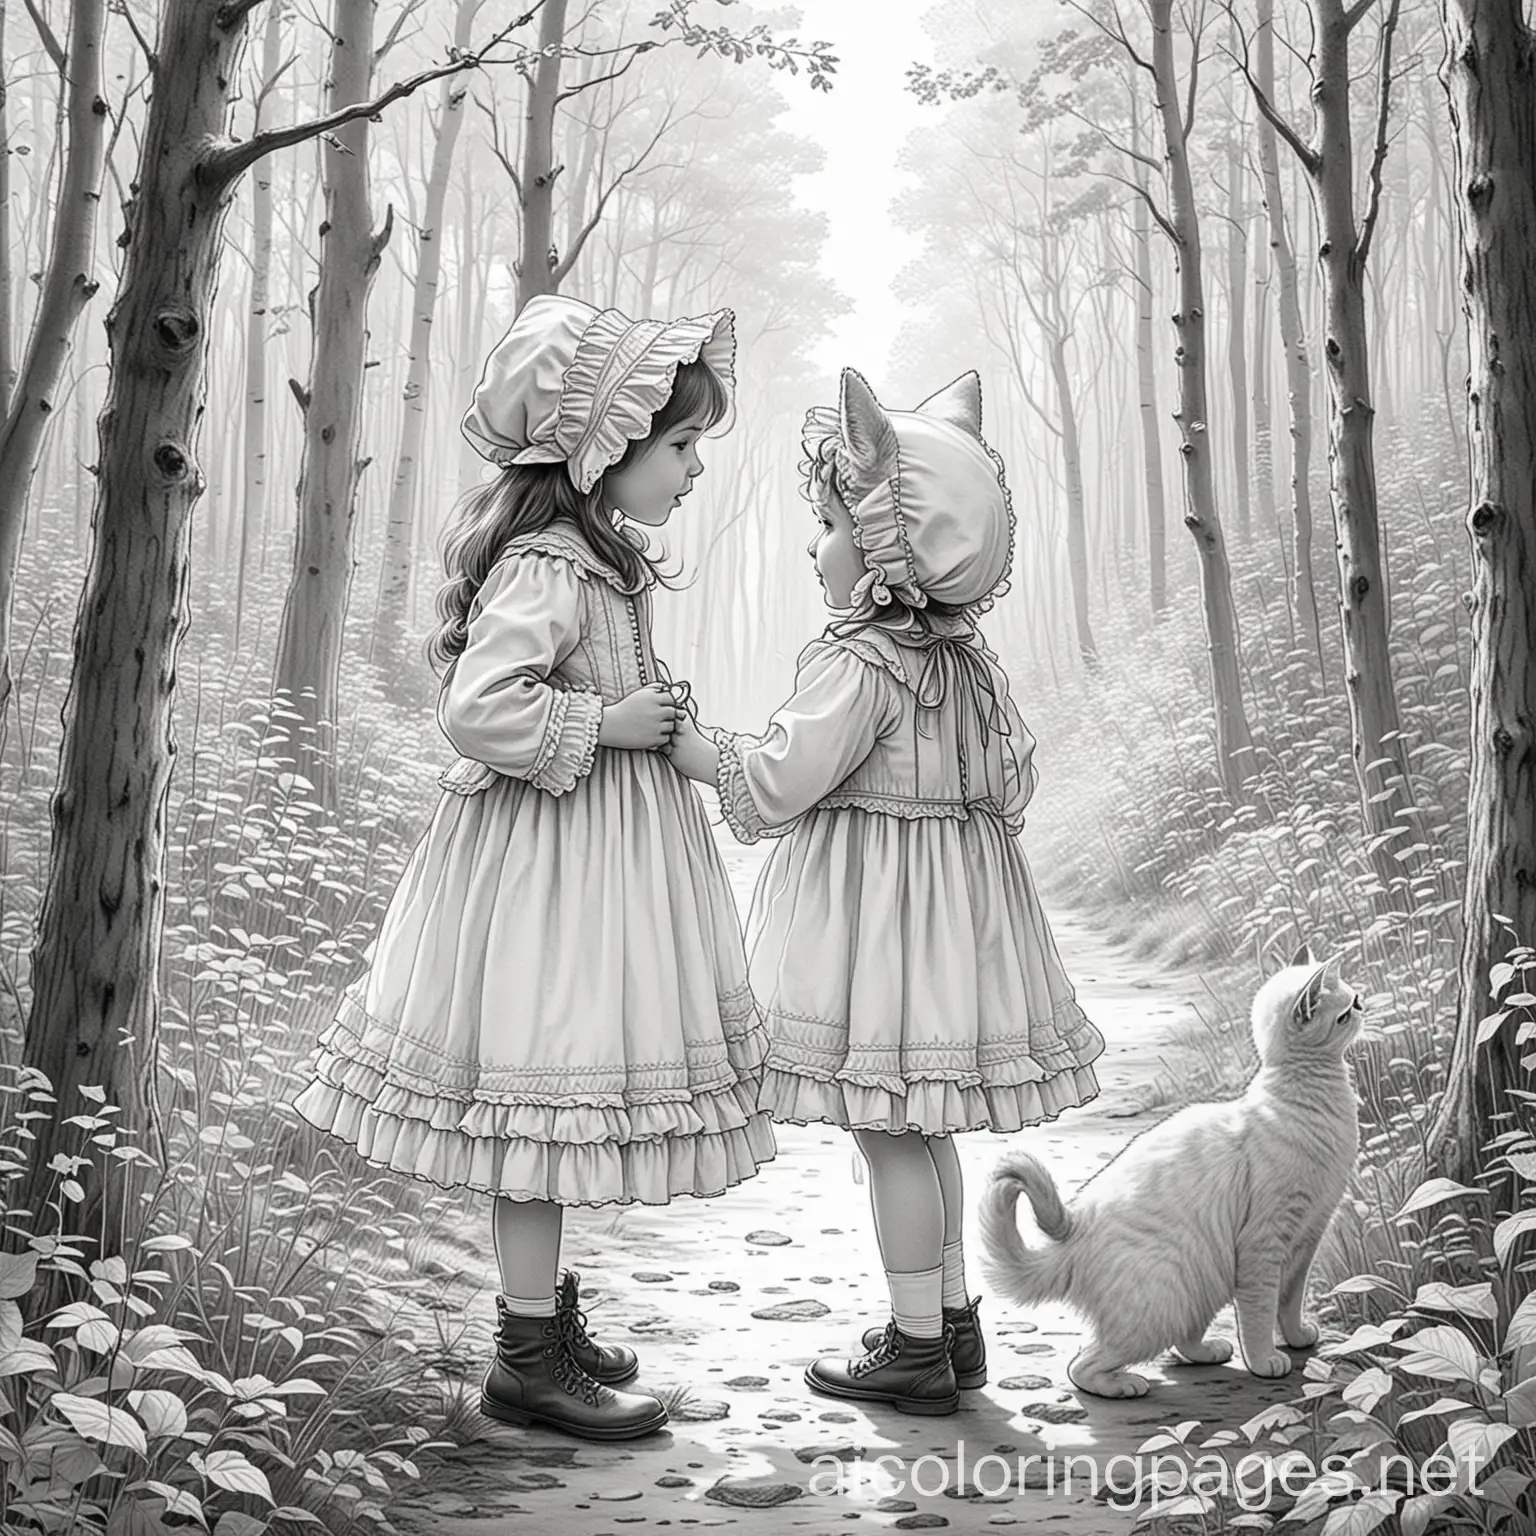 a little girl wearing old fashioned traditional clothes like an old frilly bonnet and playing with a cat in a beautiful forest, Coloring Page, black and white, line art, white background, Simplicity, Ample White Space. The background of the coloring page is plain white to make it easy for young children to color within the lines. The outlines of all the subjects are easy to distinguish, making it simple for kids to color without too much difficulty